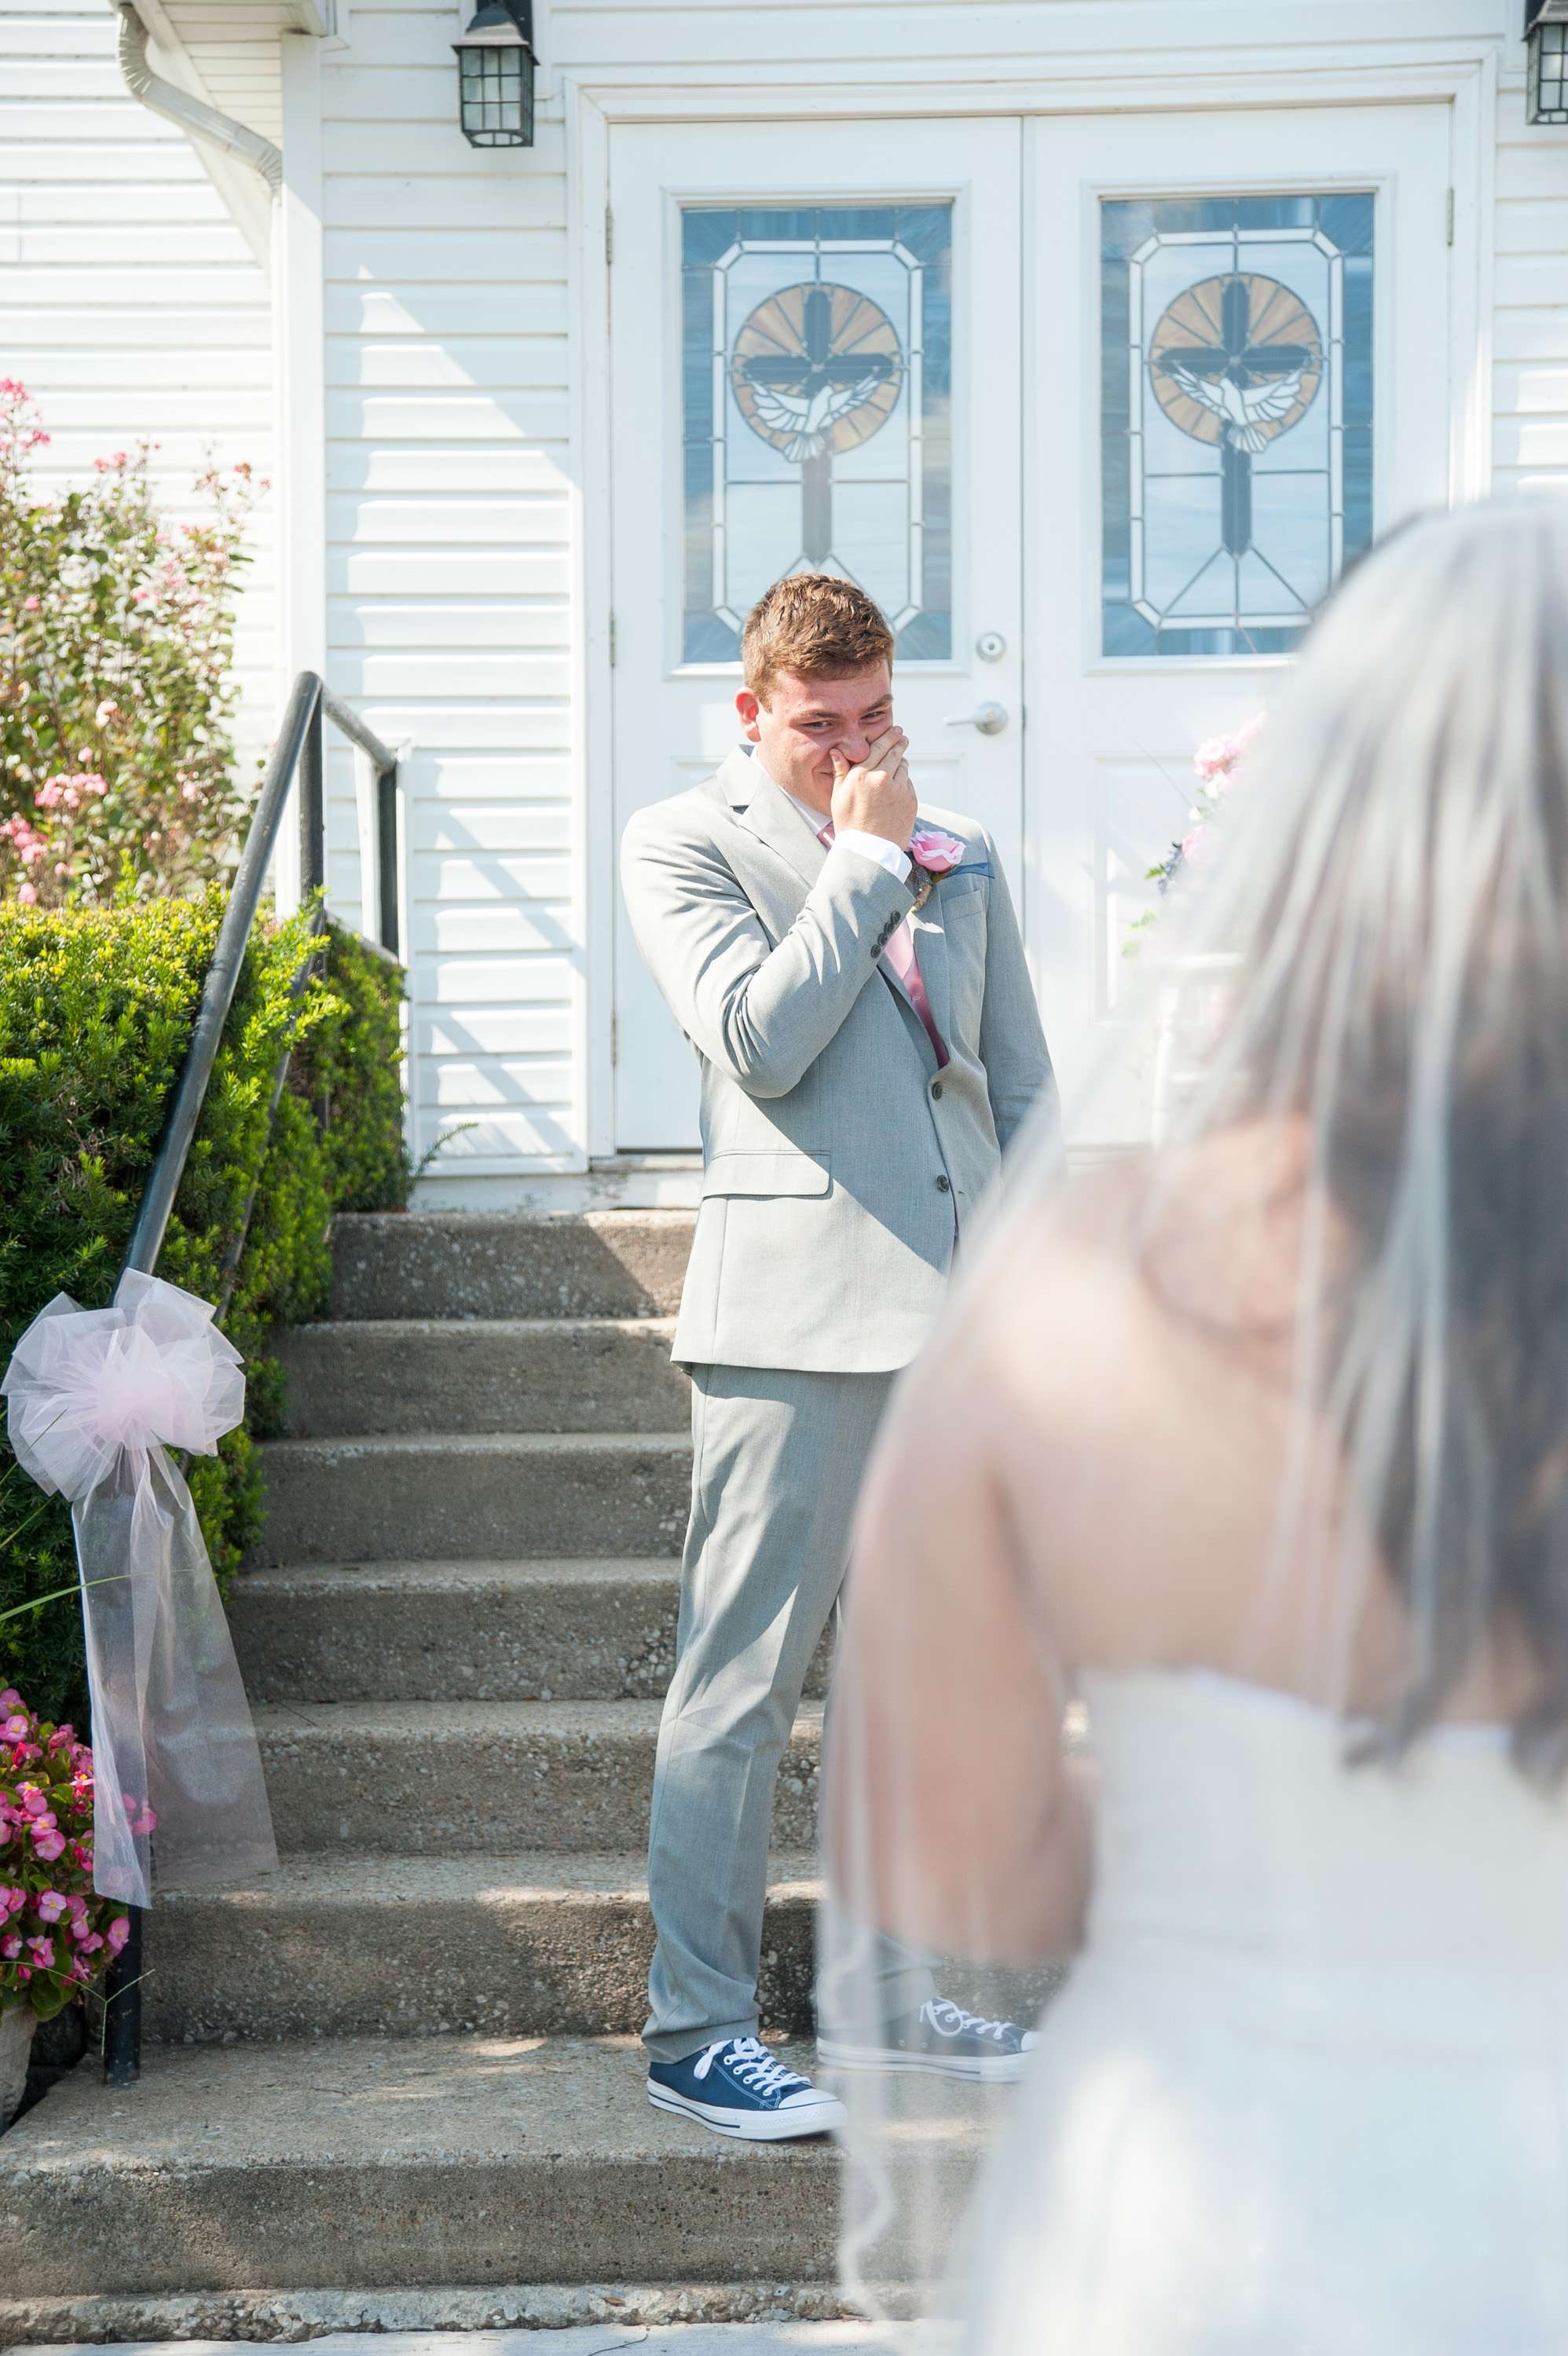 Groom seeing his bride for the first time on their wedding day.